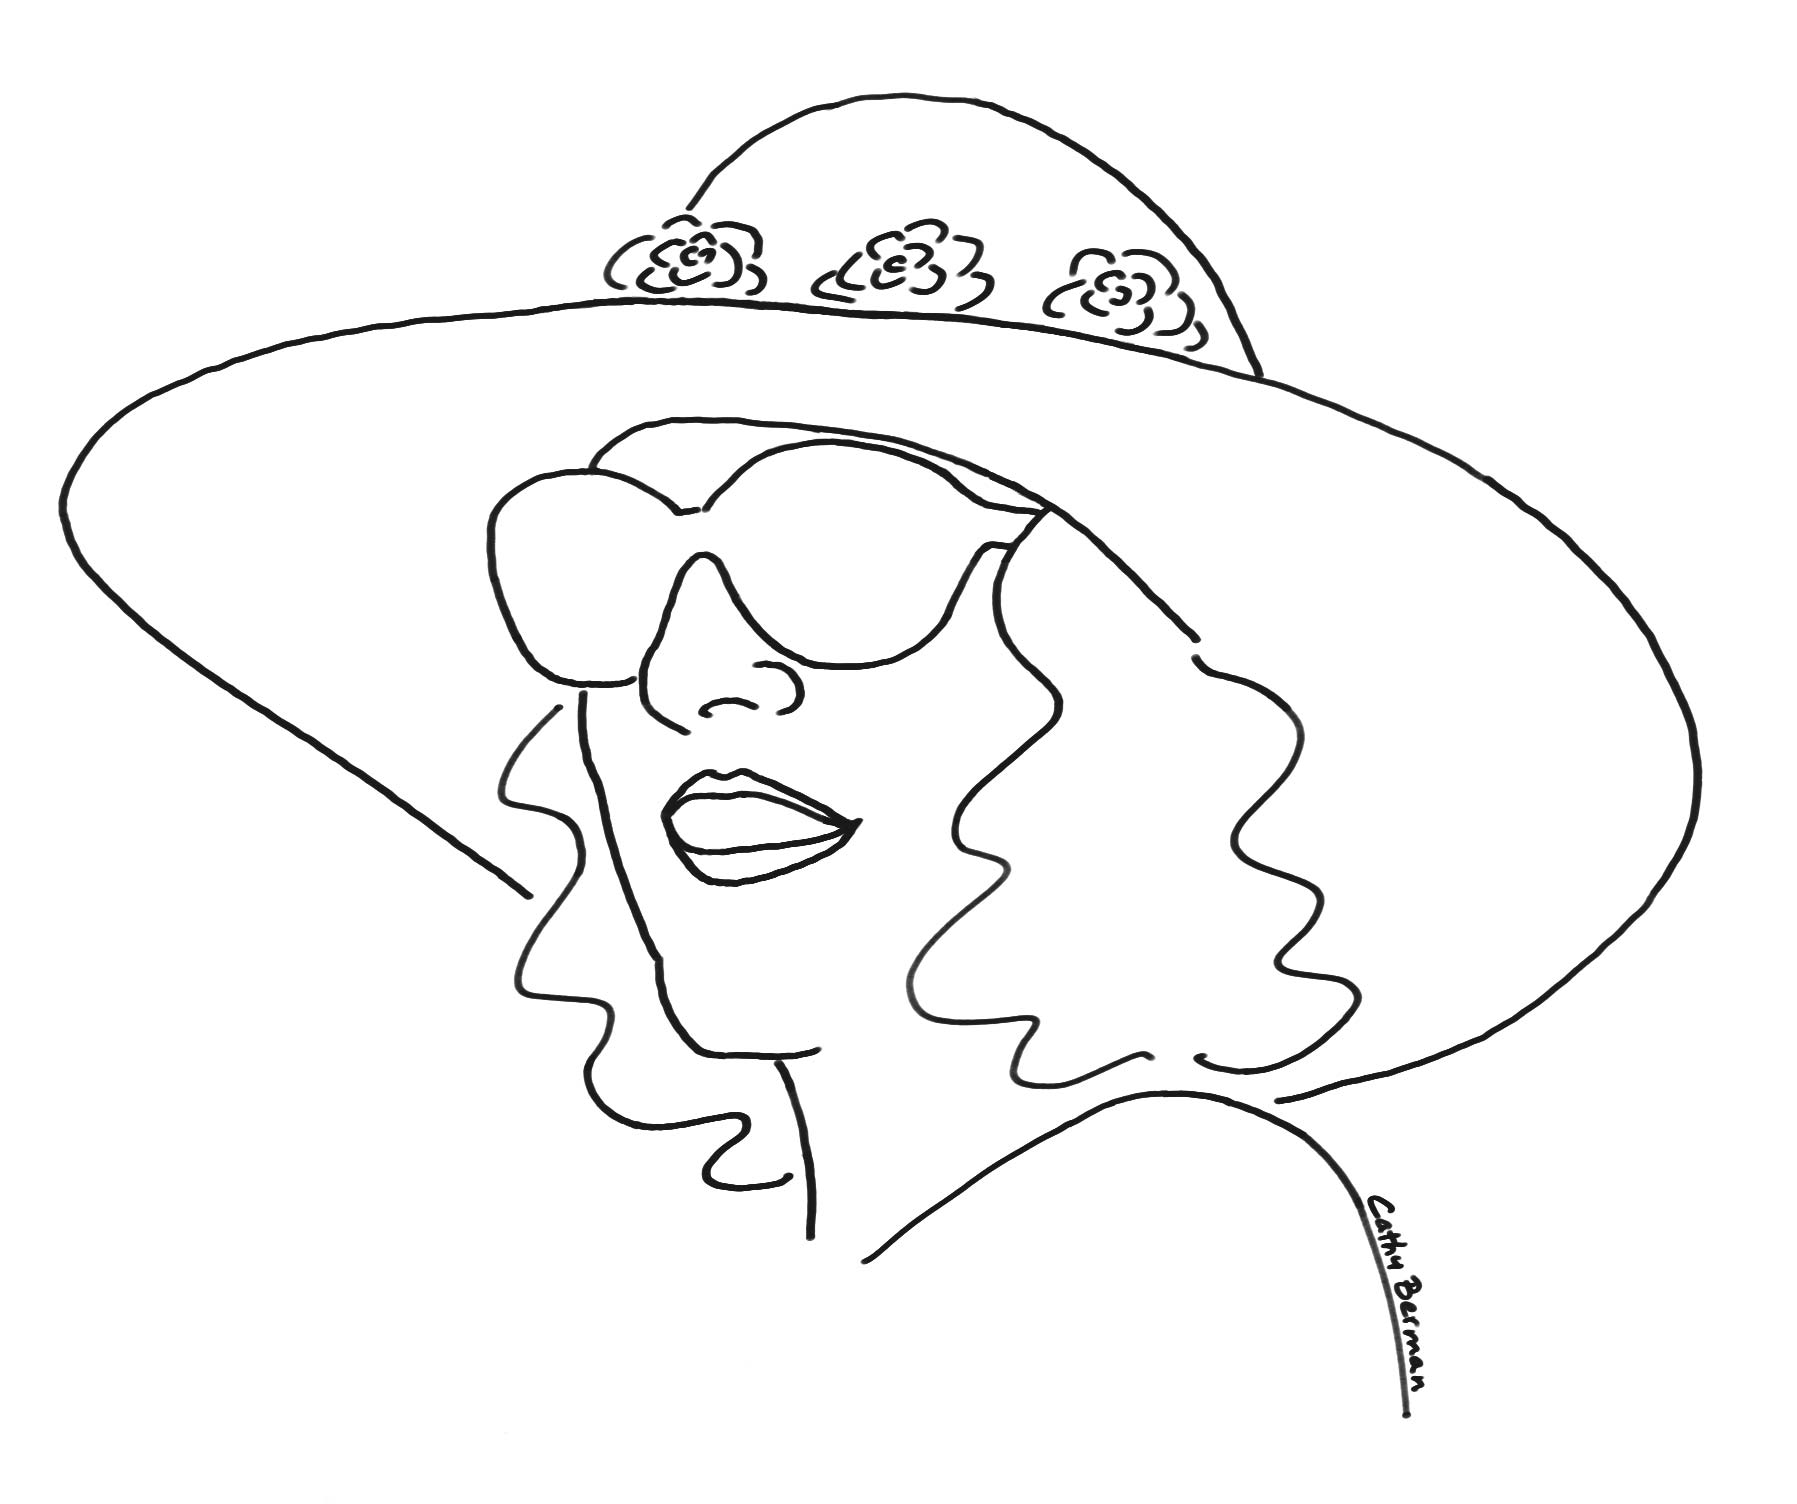 Cathy in sunhat final converted to bw savedforweb40